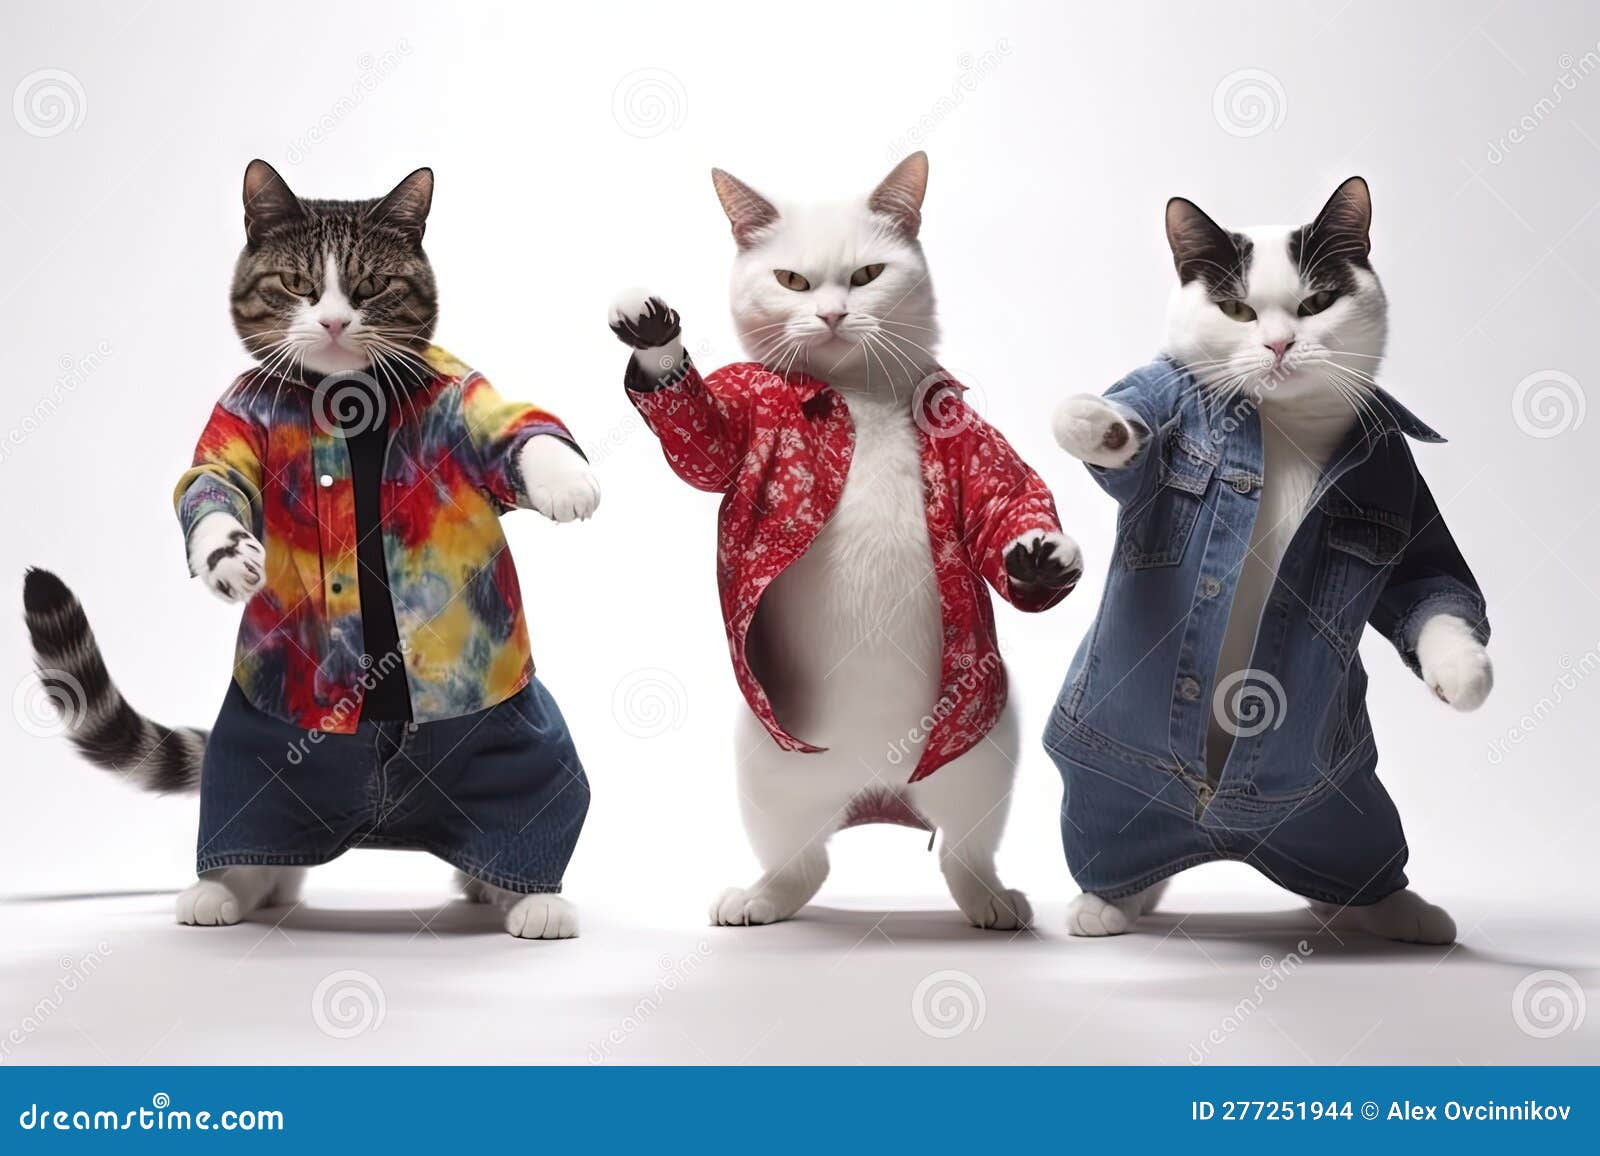 feline fashionistas: cats dancing gangnam style in human clothes on white background. perfect for invitations and posters.